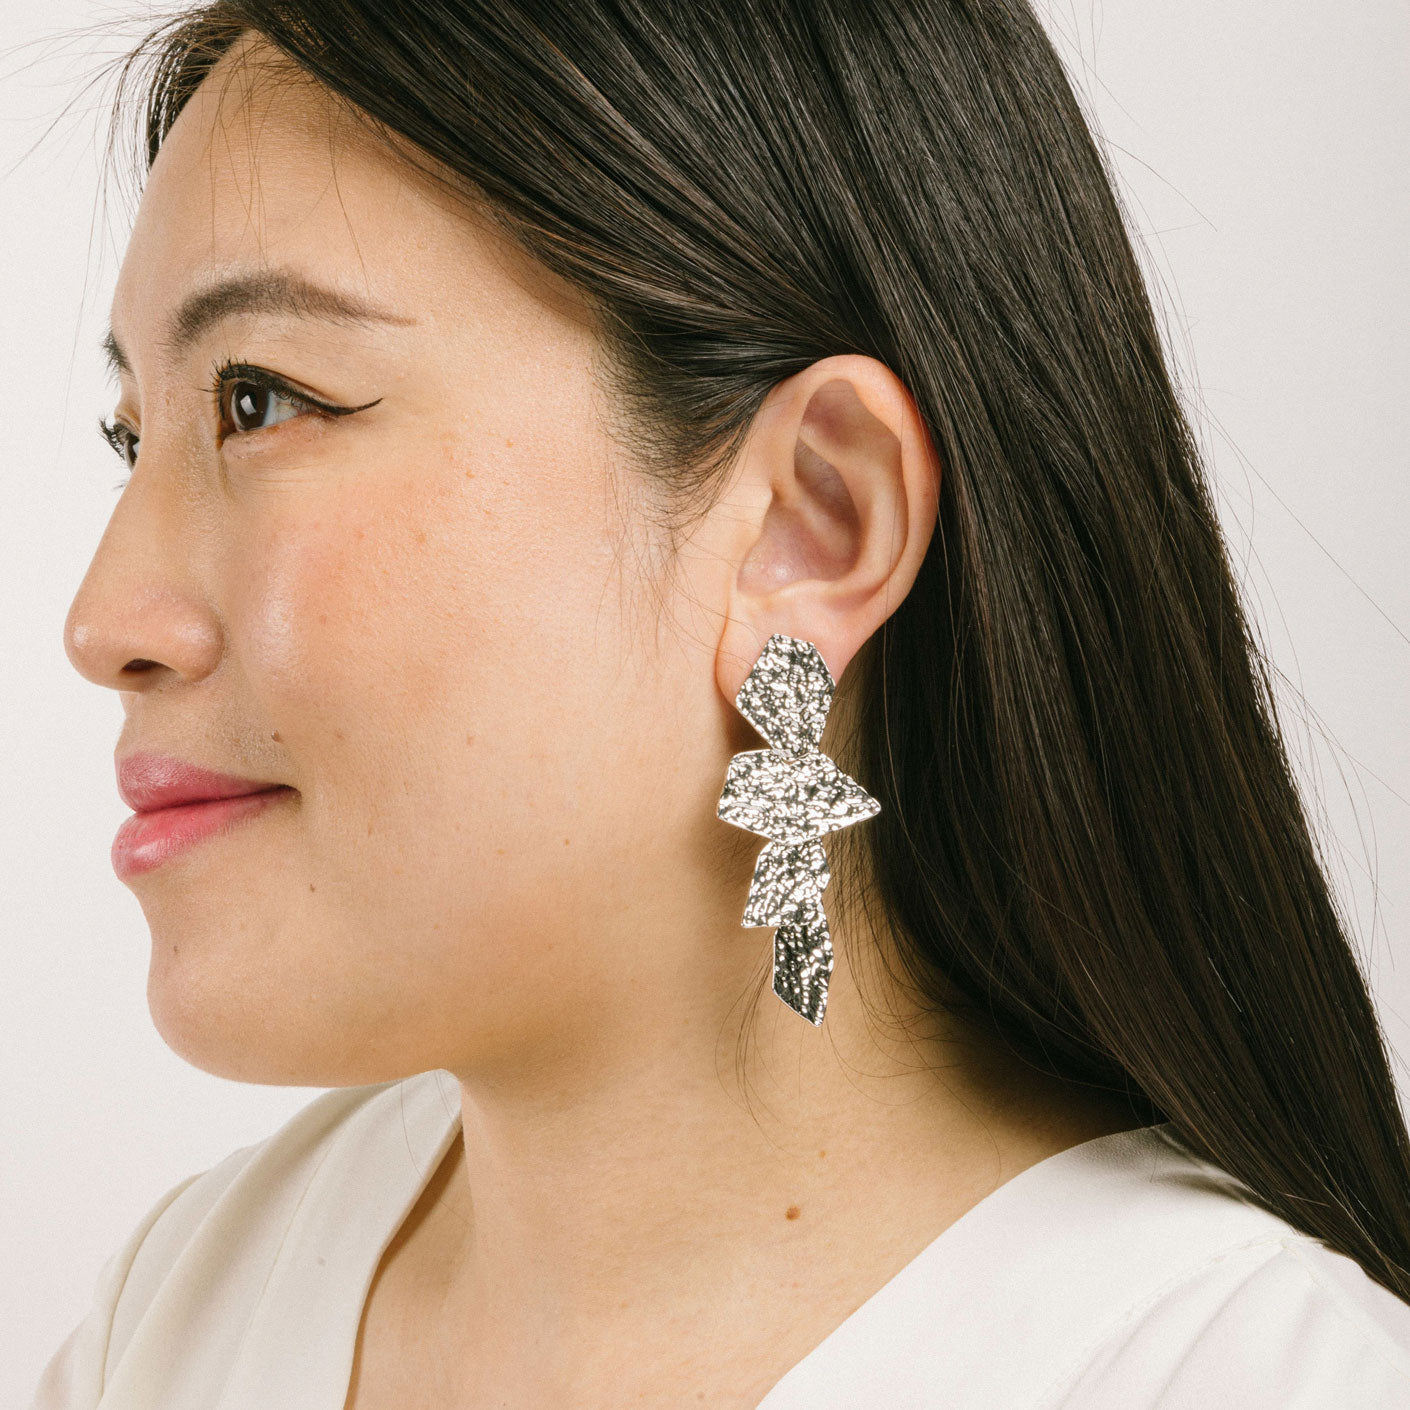 A model wearing the Manhattan Drop Clip On Earrings in Silver provide a secure and comfortable fit for any ear type. The padded clip-on design features a zinc and copper alloy construction, and lasts approximately 8-12 hours. As the earring pairs are non-adjustable, each purchase contains a single pair.